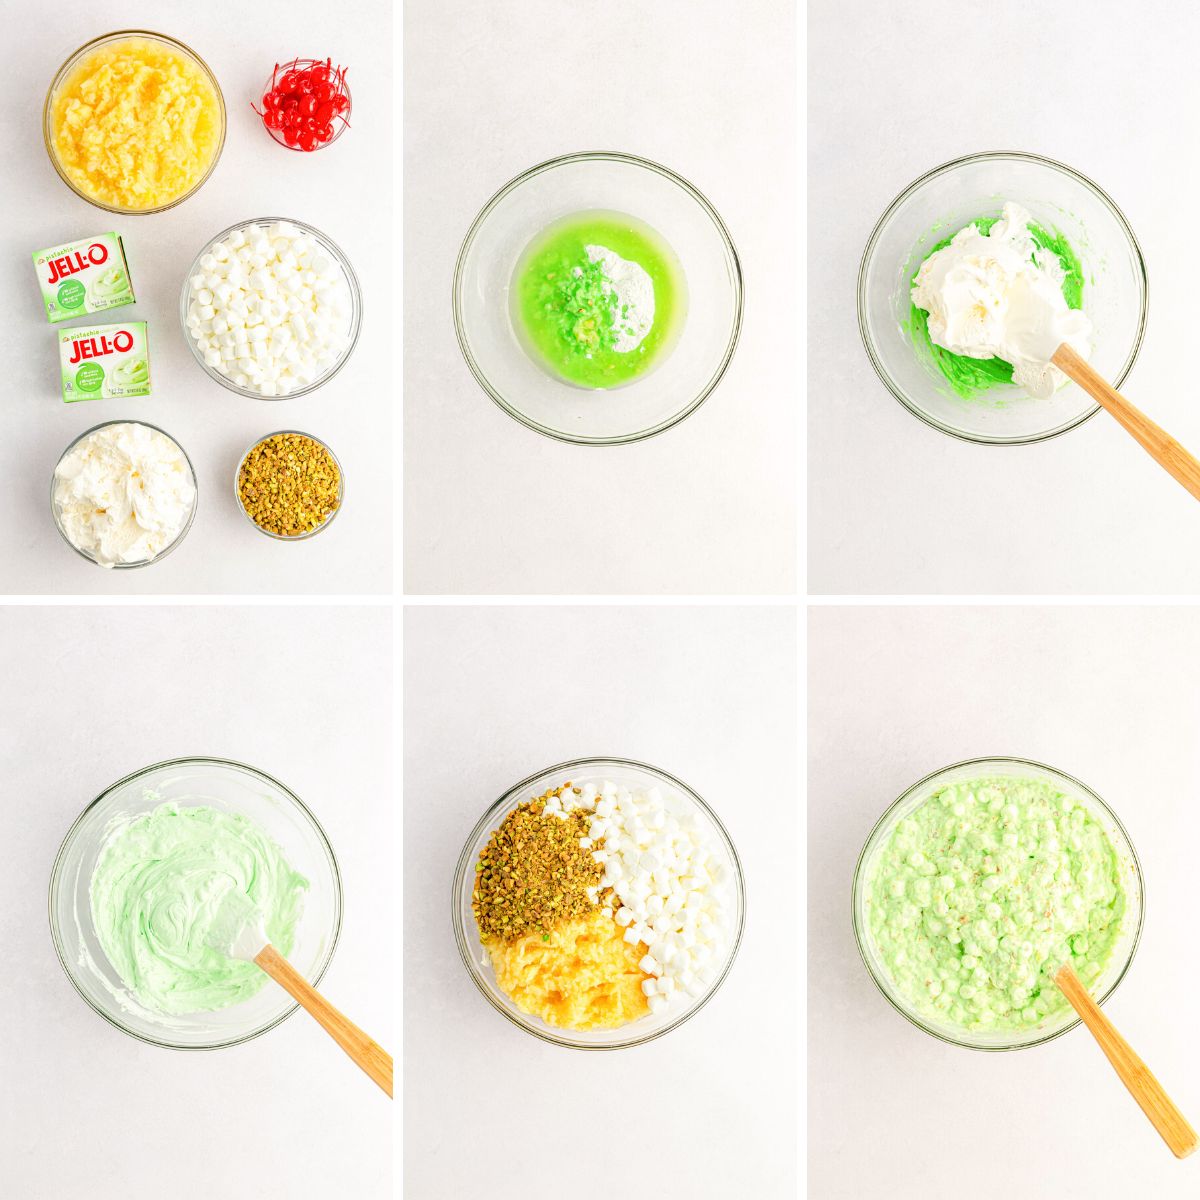 Step by step photo collage showing how to make watergate salad (pineapple pistachio fluff).